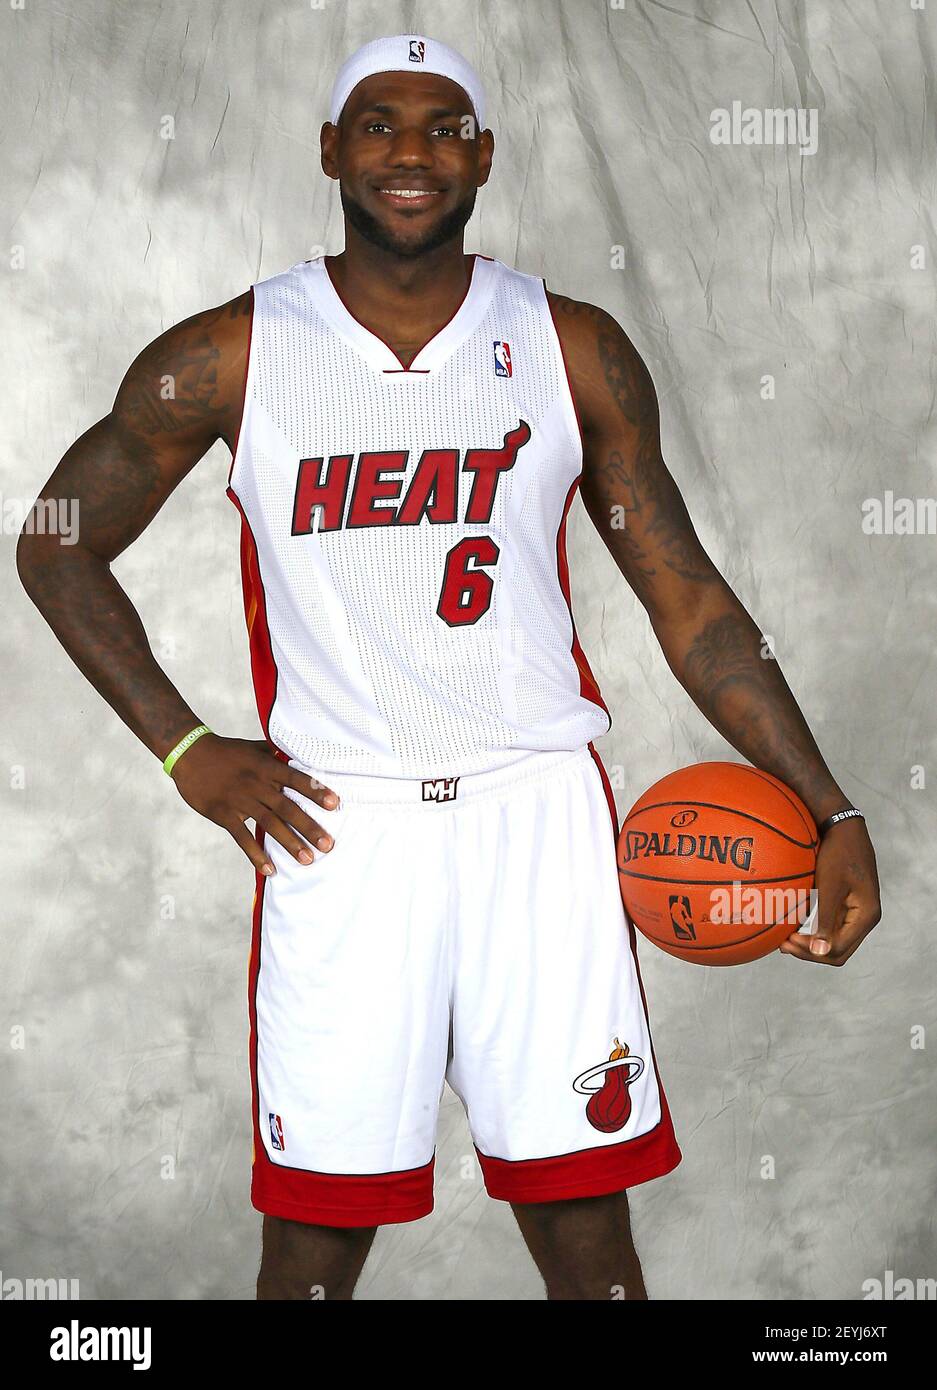 The Miami Heat's LeBron James poses for a portrait during the team's Media Day at AmericanAirlines Arena in Miami, Florida, on September 30, 2013. (Photo by David Santiago/El Nuevo Herald/MCT/Sipa USA) Stock Photo